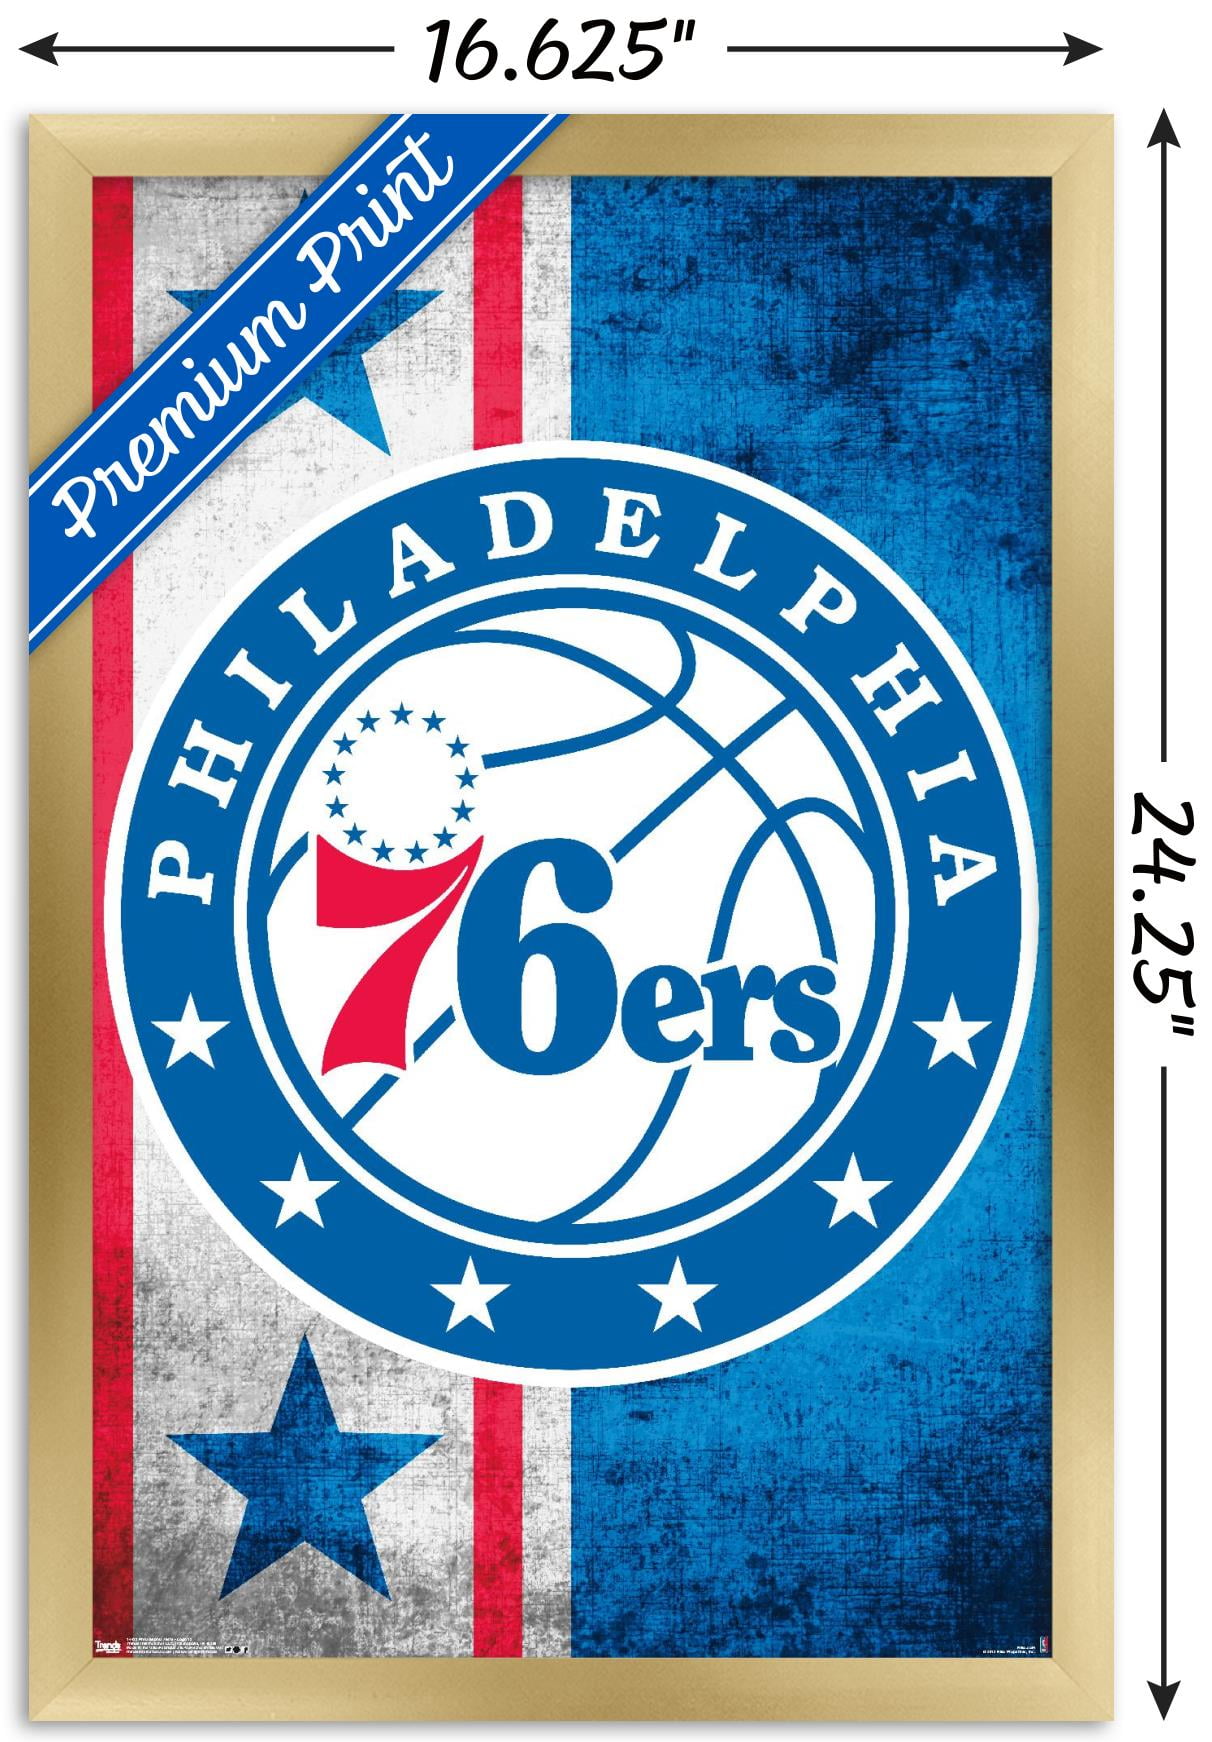 Pin on 76ers